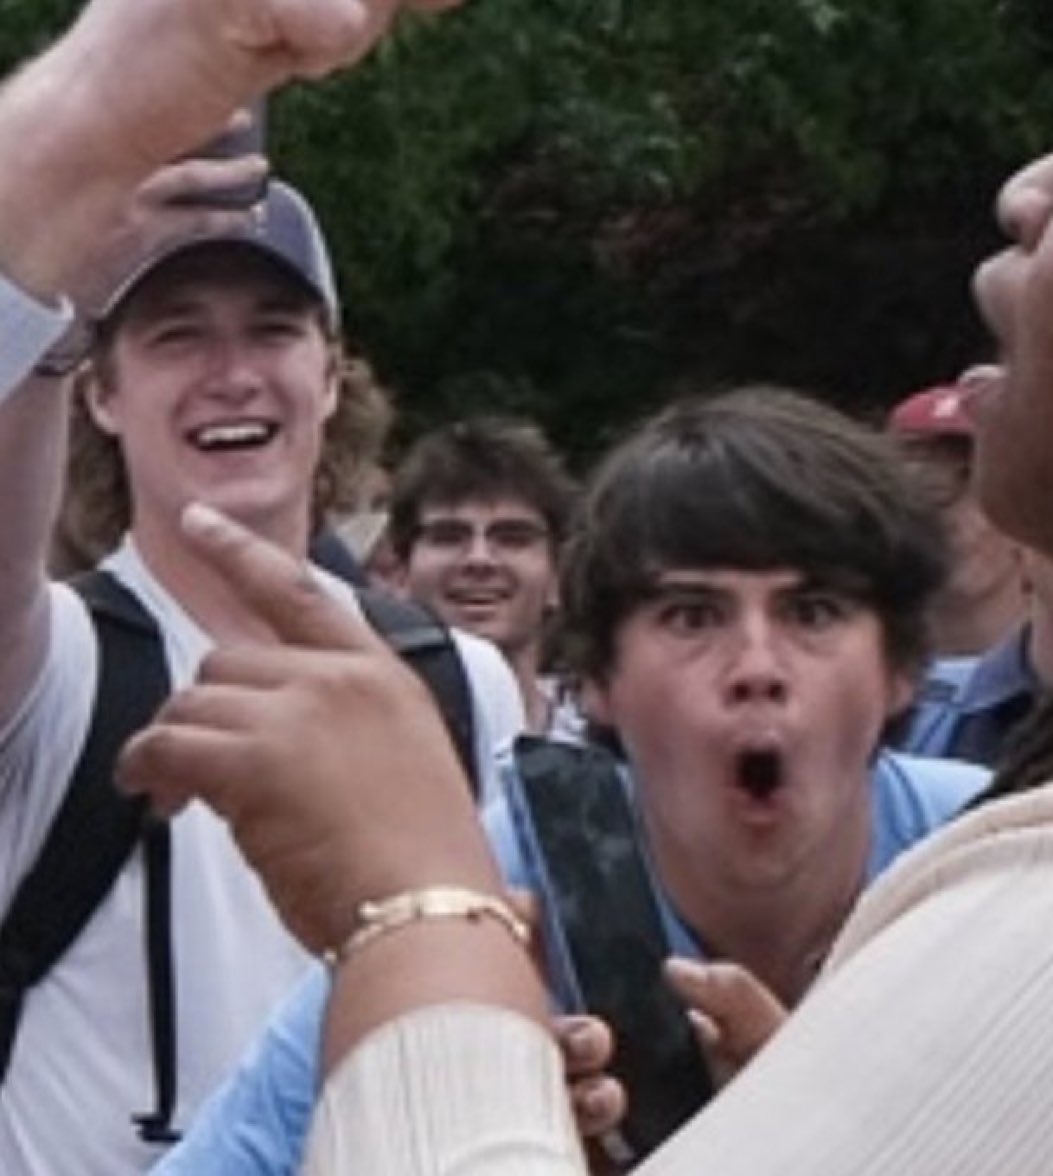 The face of racism. Here is one of the guys from the Ole Miss video making monkey sounds towards a black woman. No child is born with hate. Hate is taught